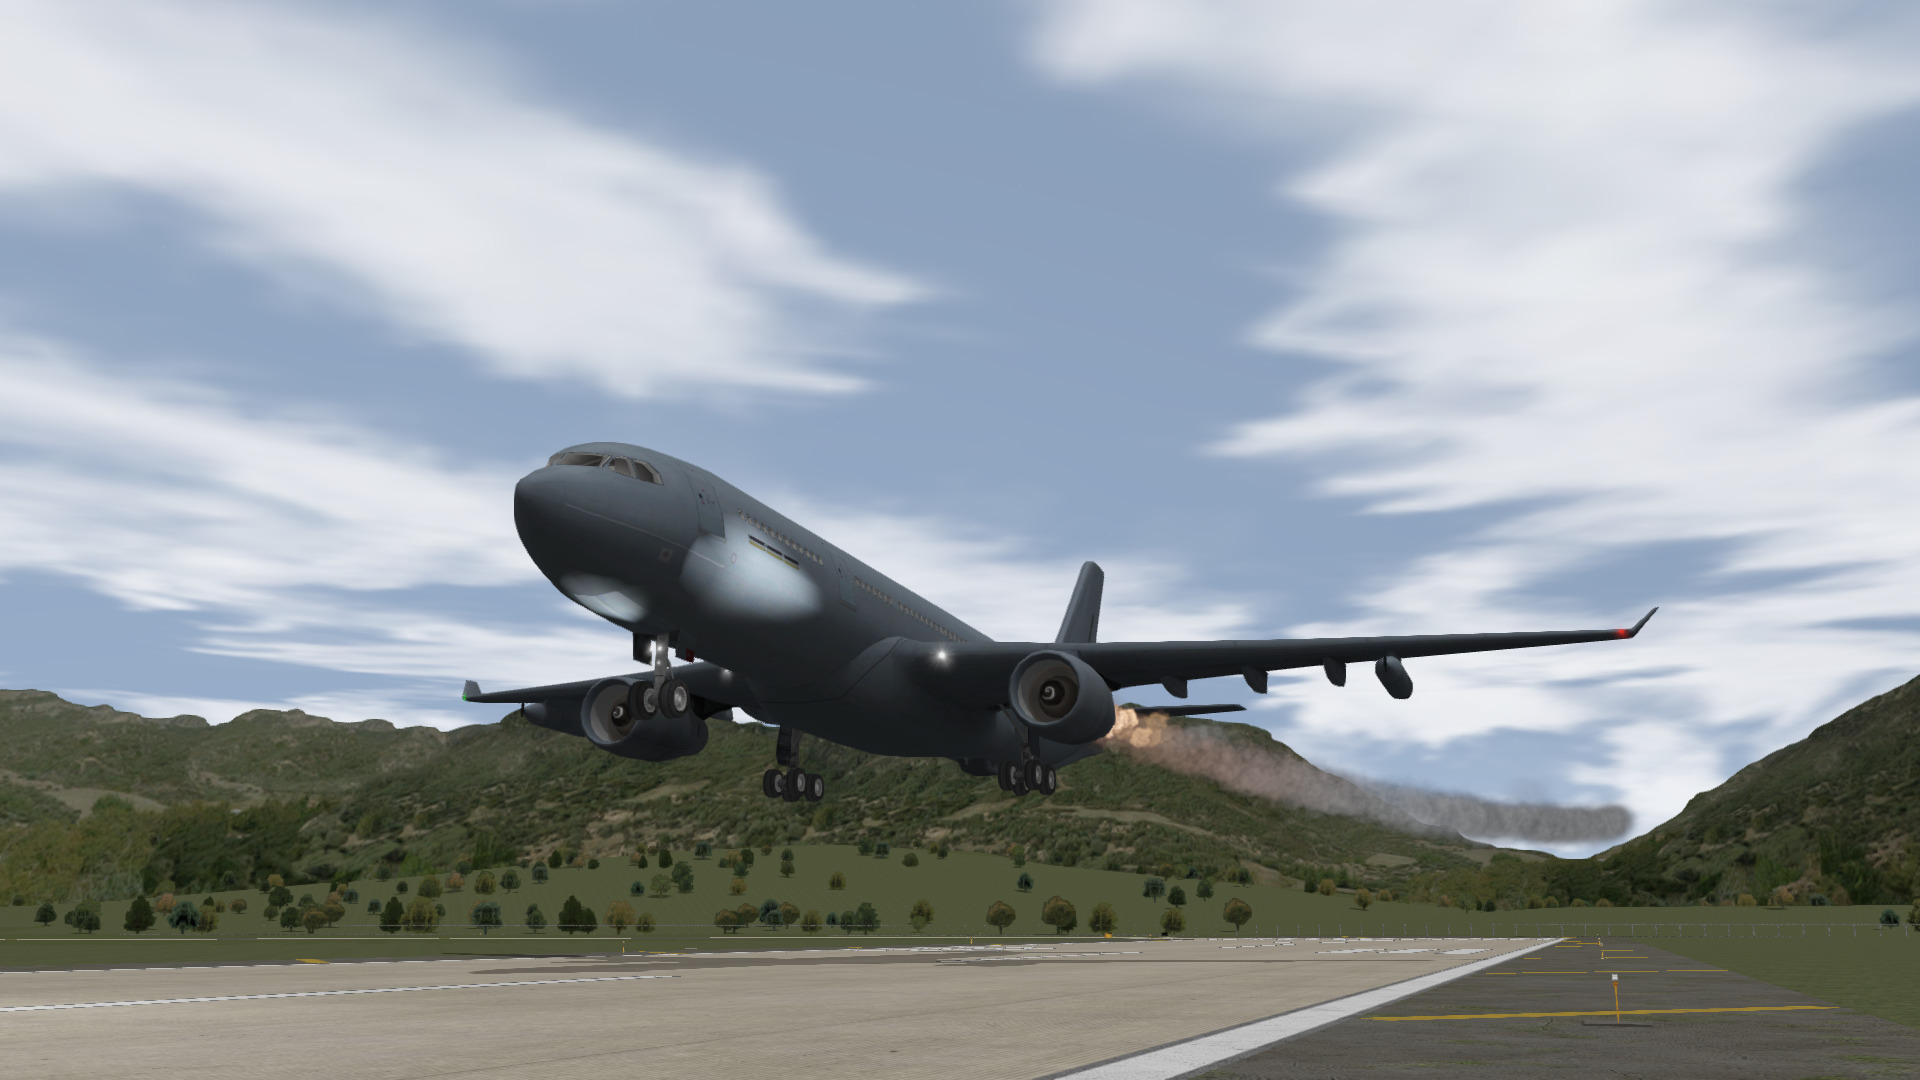 A-330 Emergency landing at an airbase with left engine fire.